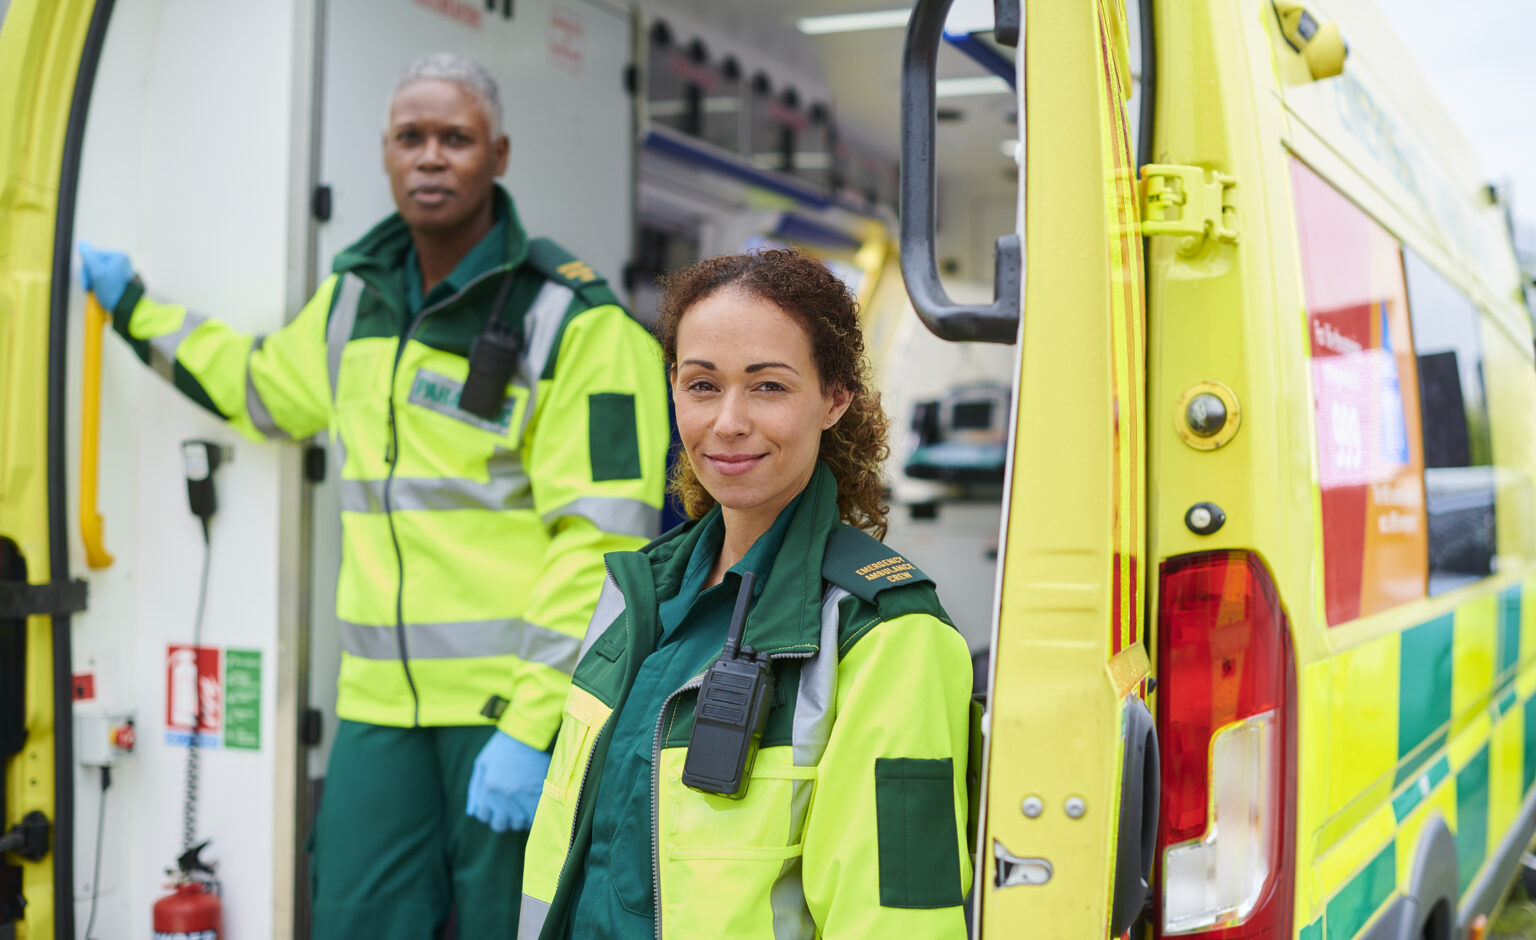 When are the ambulance strikes and what to do if you need emergency help?